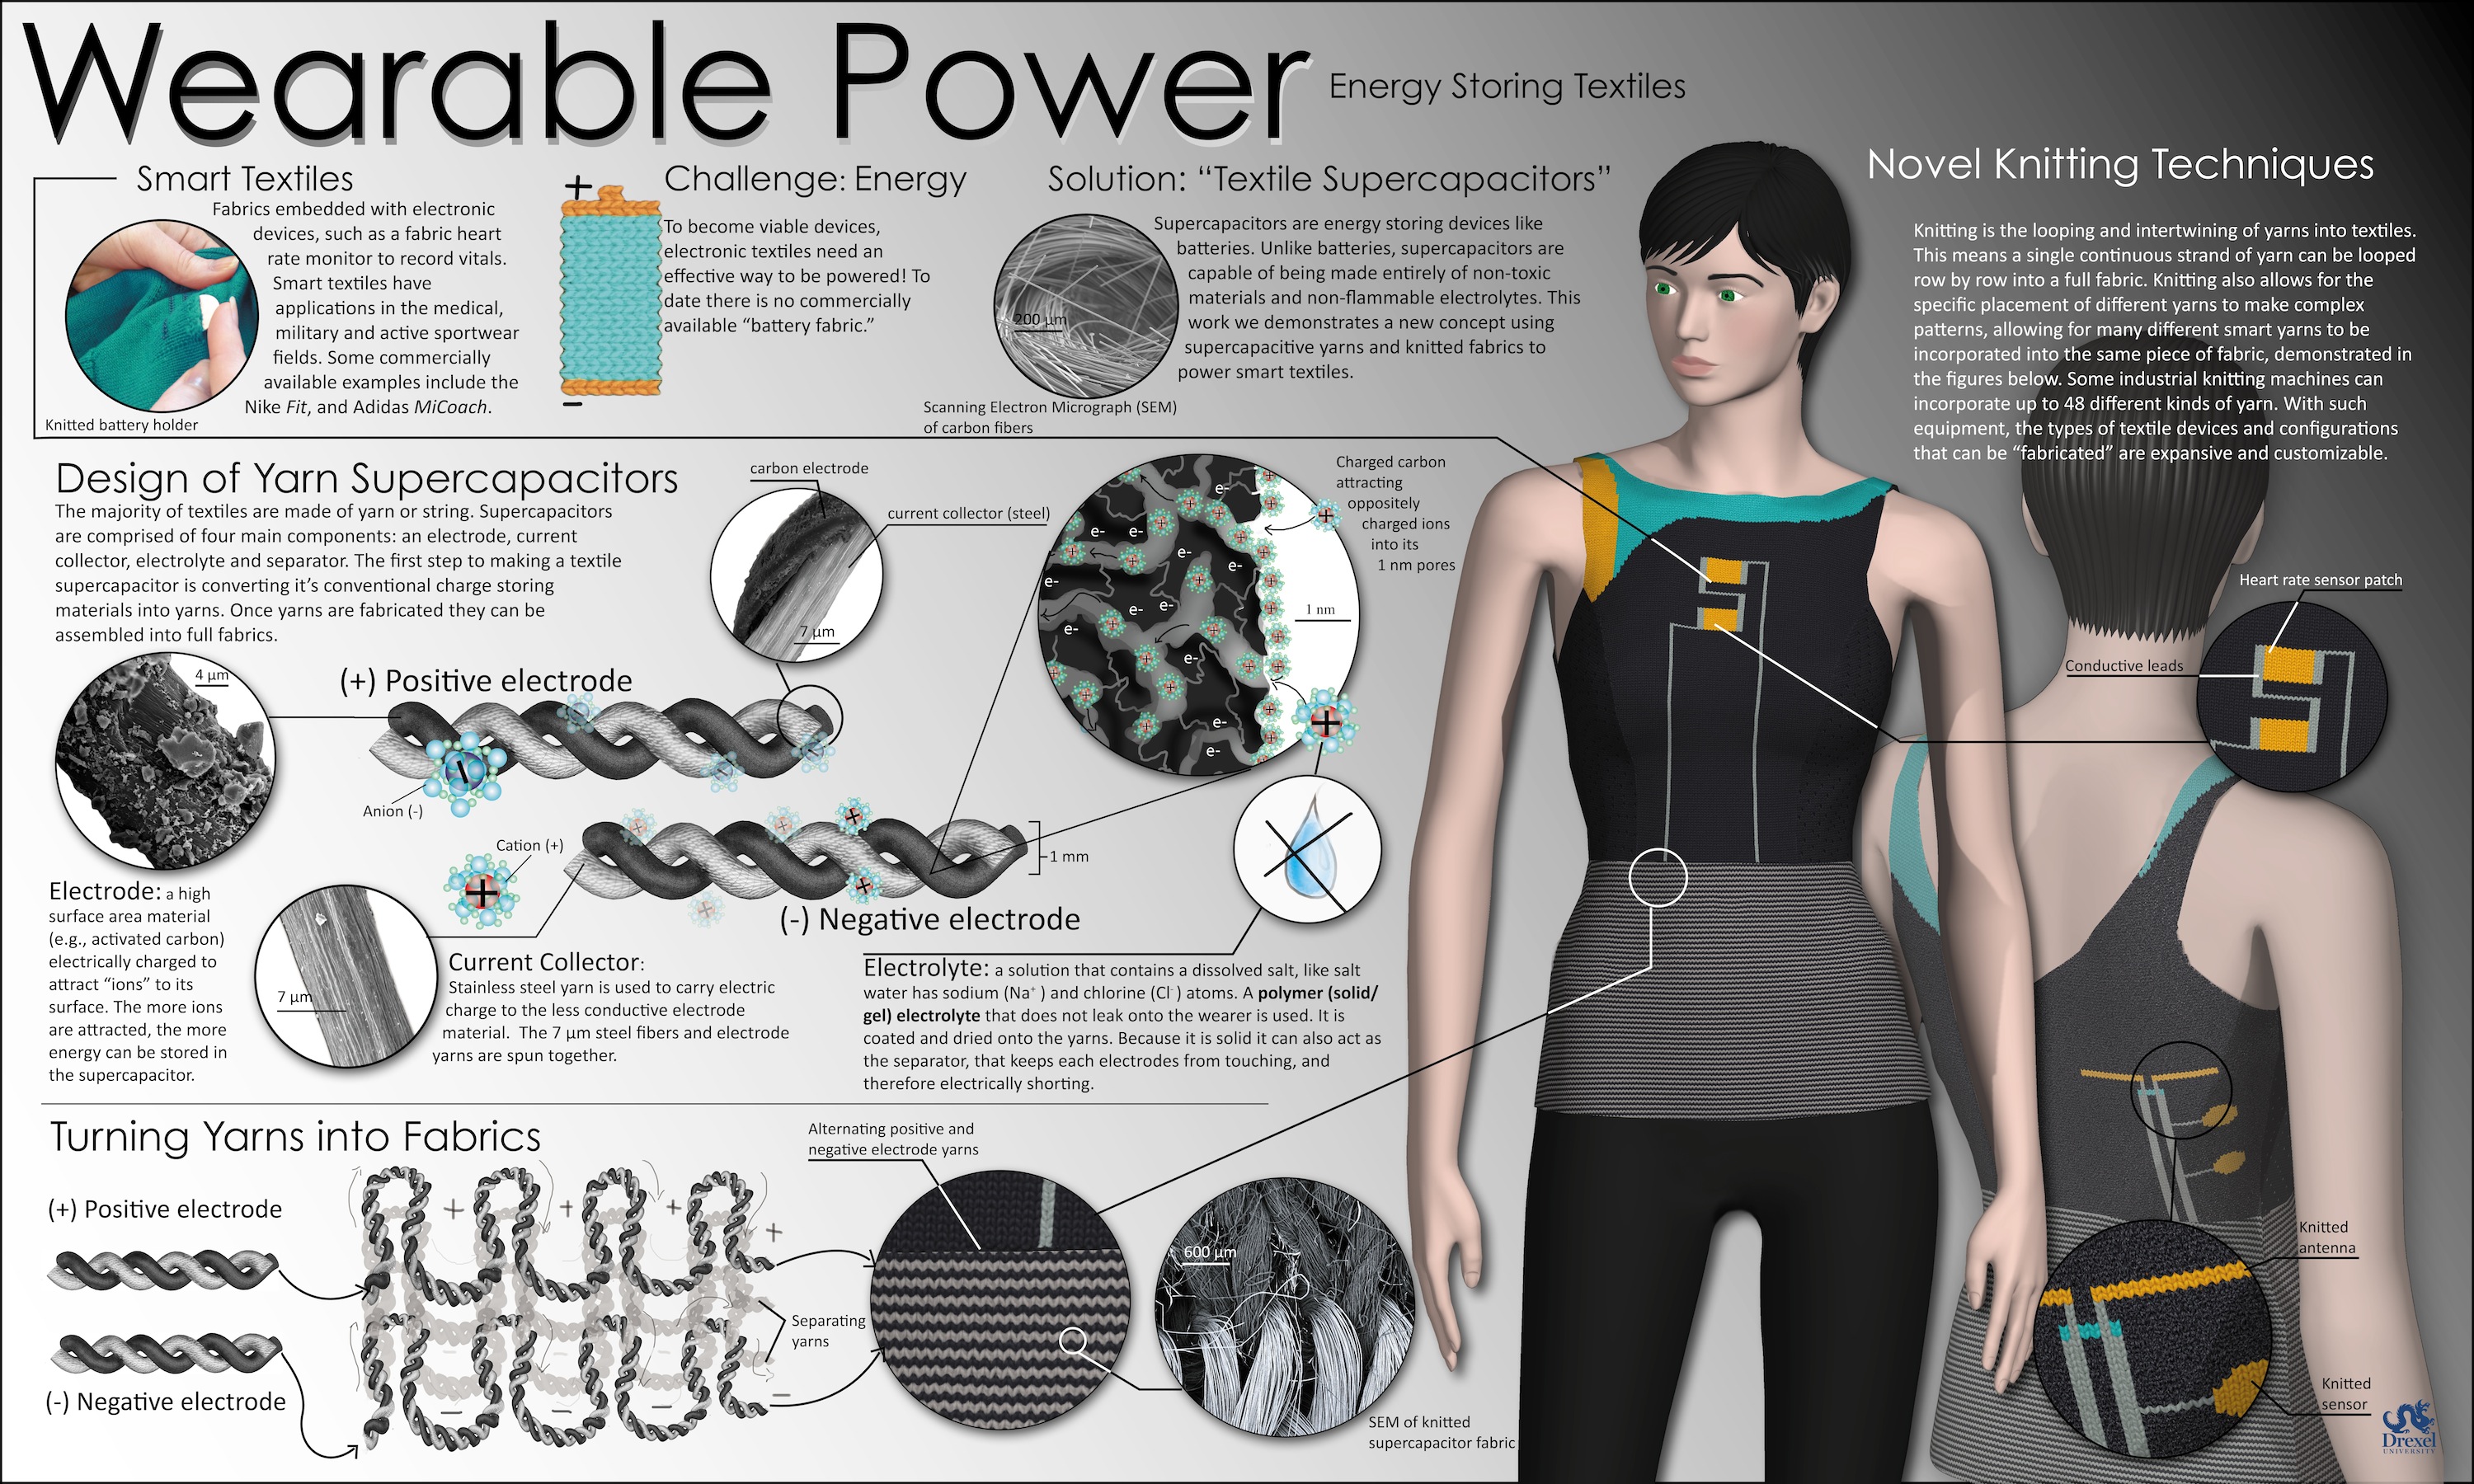 'Wearable Power' depicts a method for knitting supercapacitors from stainless steel and electrolyte-treated yarn, a process the group is prototyping in the Shima Seiki Haute Technology Lab at the ExCITe Center.  (Image credit: Kristy Jost, Babak Anasori, Majid Beidaghi, Genevieve Dion, Yury Gogotsi; A.J. Drexel Nanotechnology Institute and The Shima Seiki Haute Technology Laboratory, Drexel University)